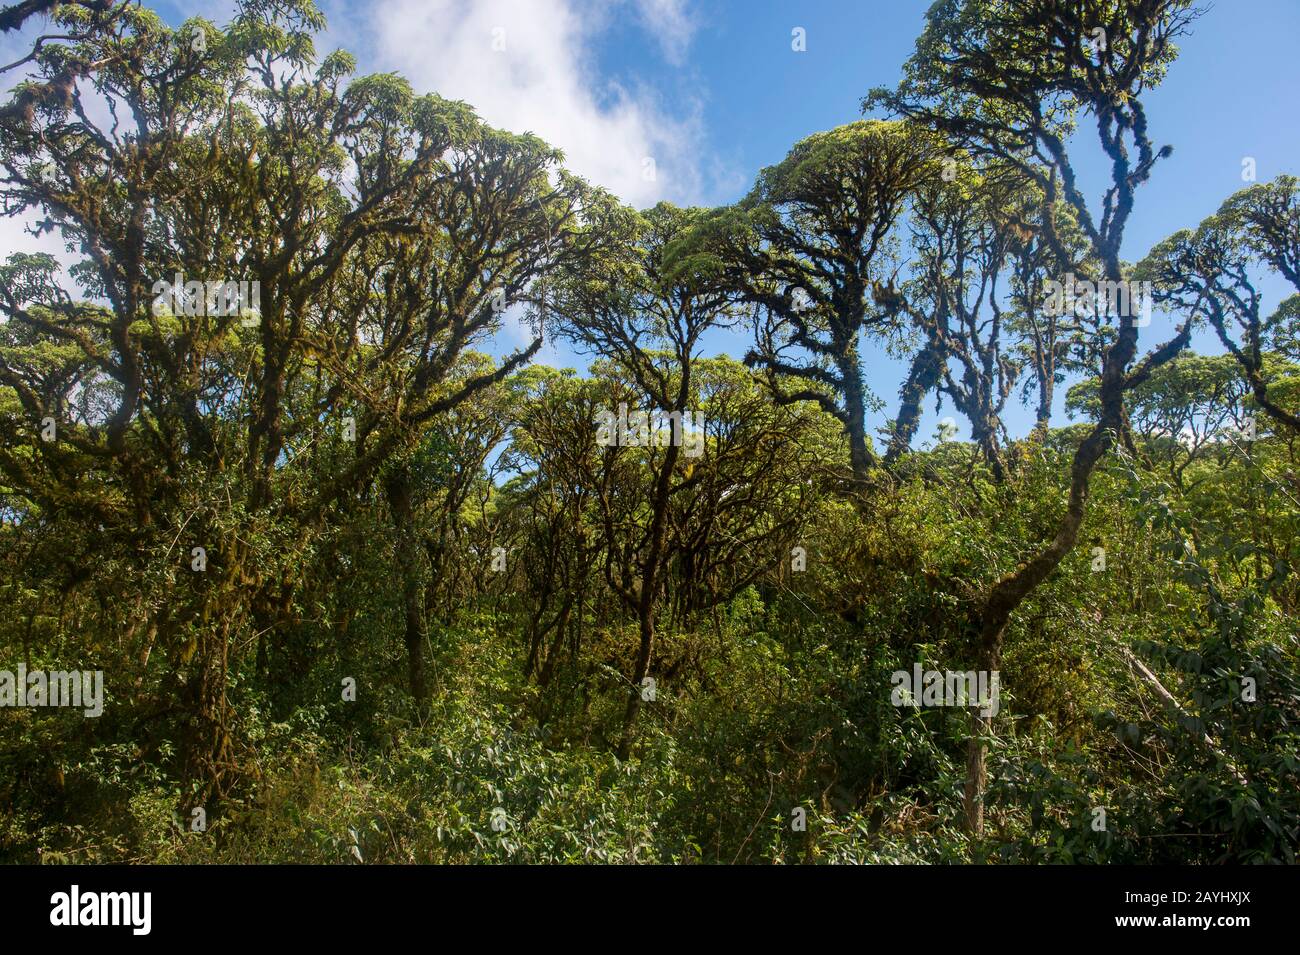 The Scalesia forest (member of the Daisy family or Asteraceae) in the highlands of Santa Cruz Island in the Galapagos Islands, Ecuador. Stock Photo